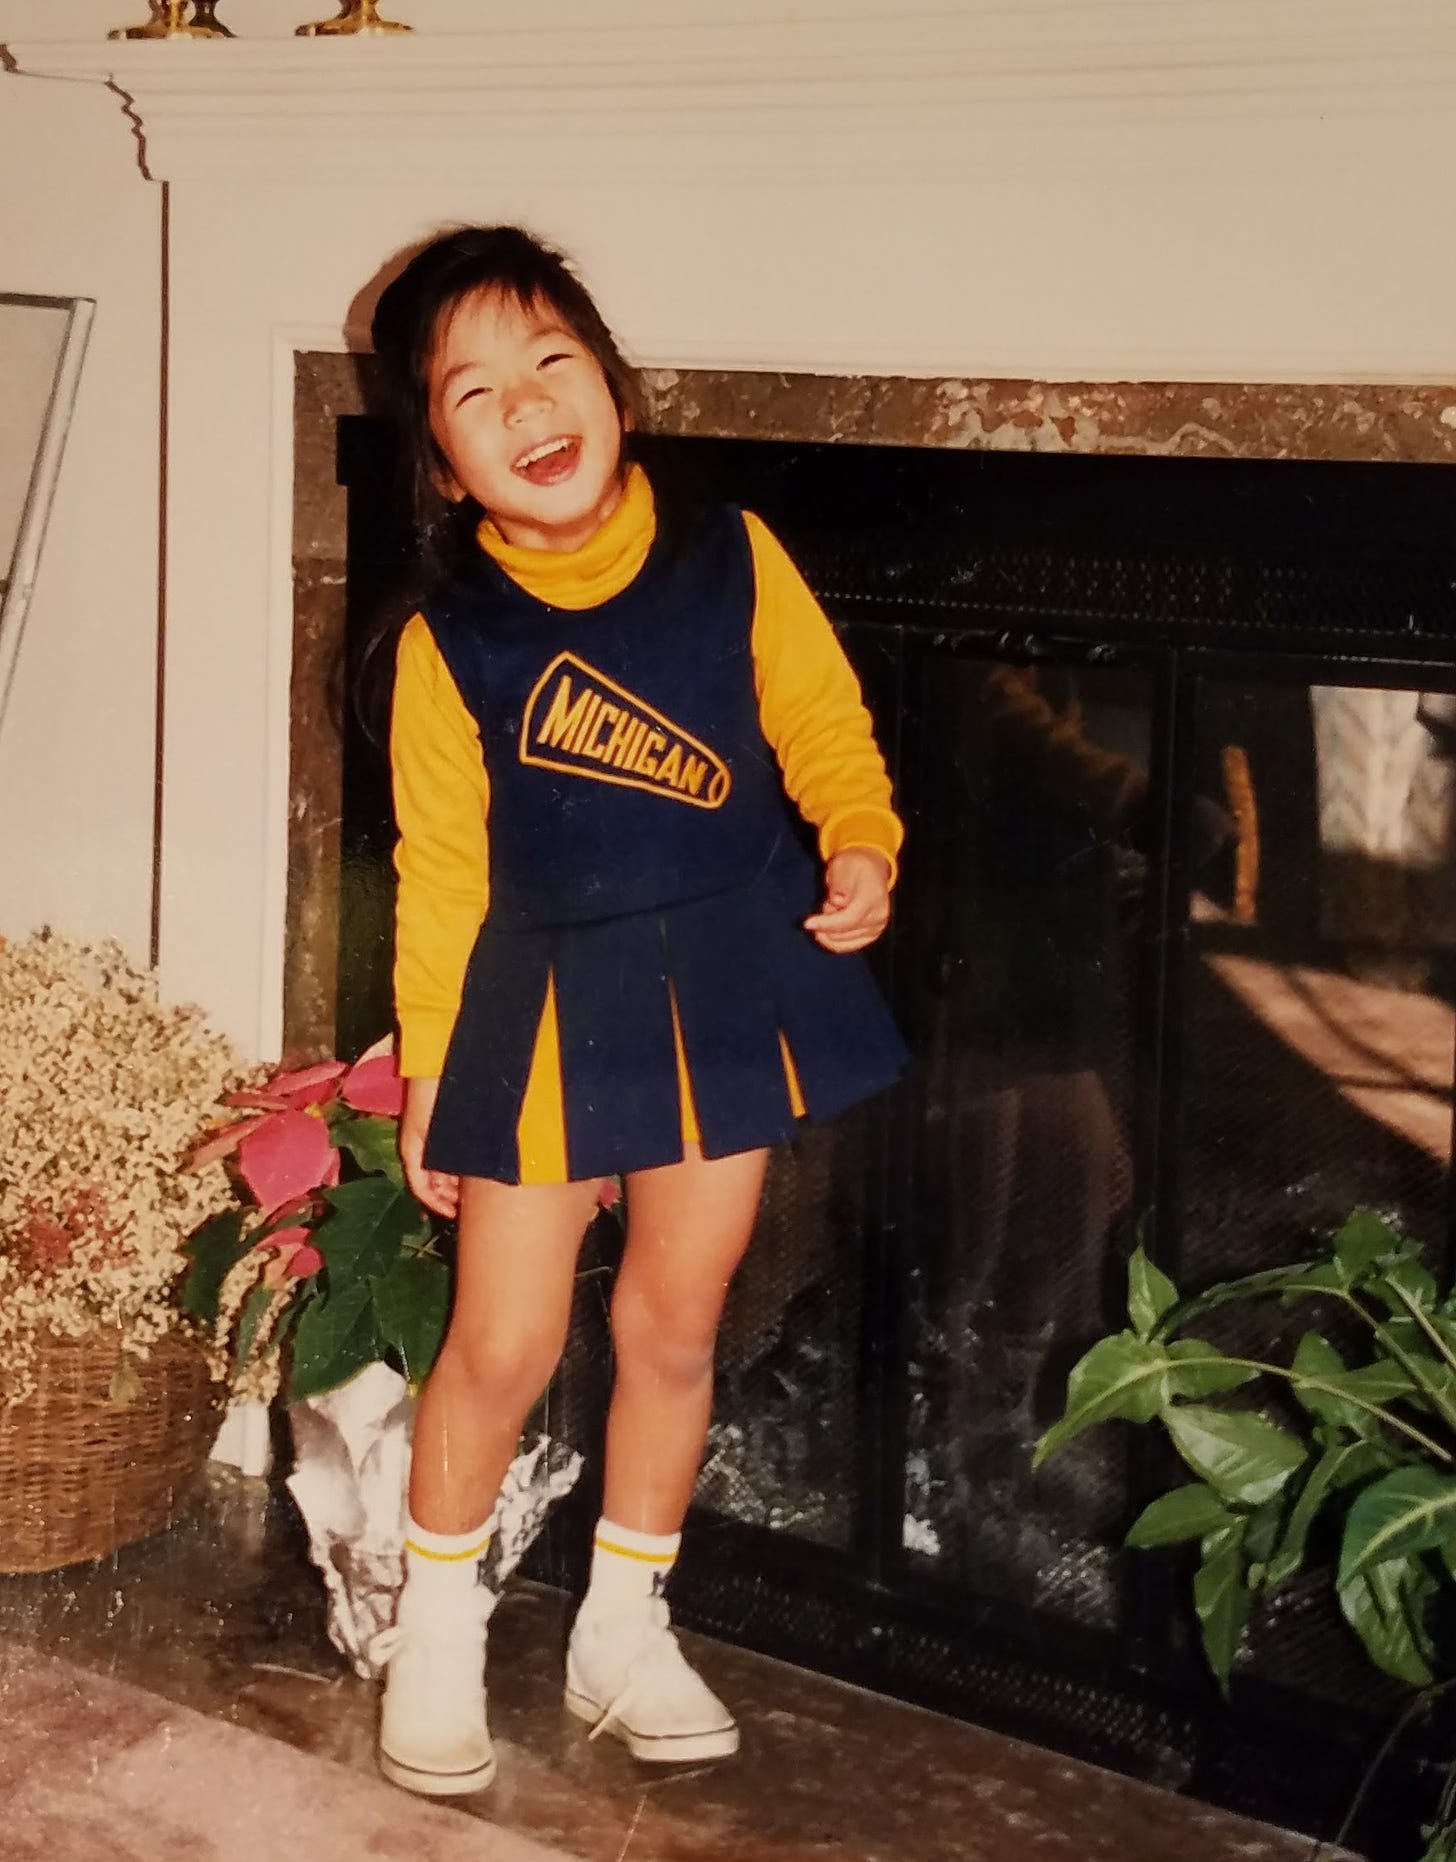 A Korean Adoptee stands next to a fireplace in a grainy photo. They wear a michigan cheerleader outfit and look joyous.